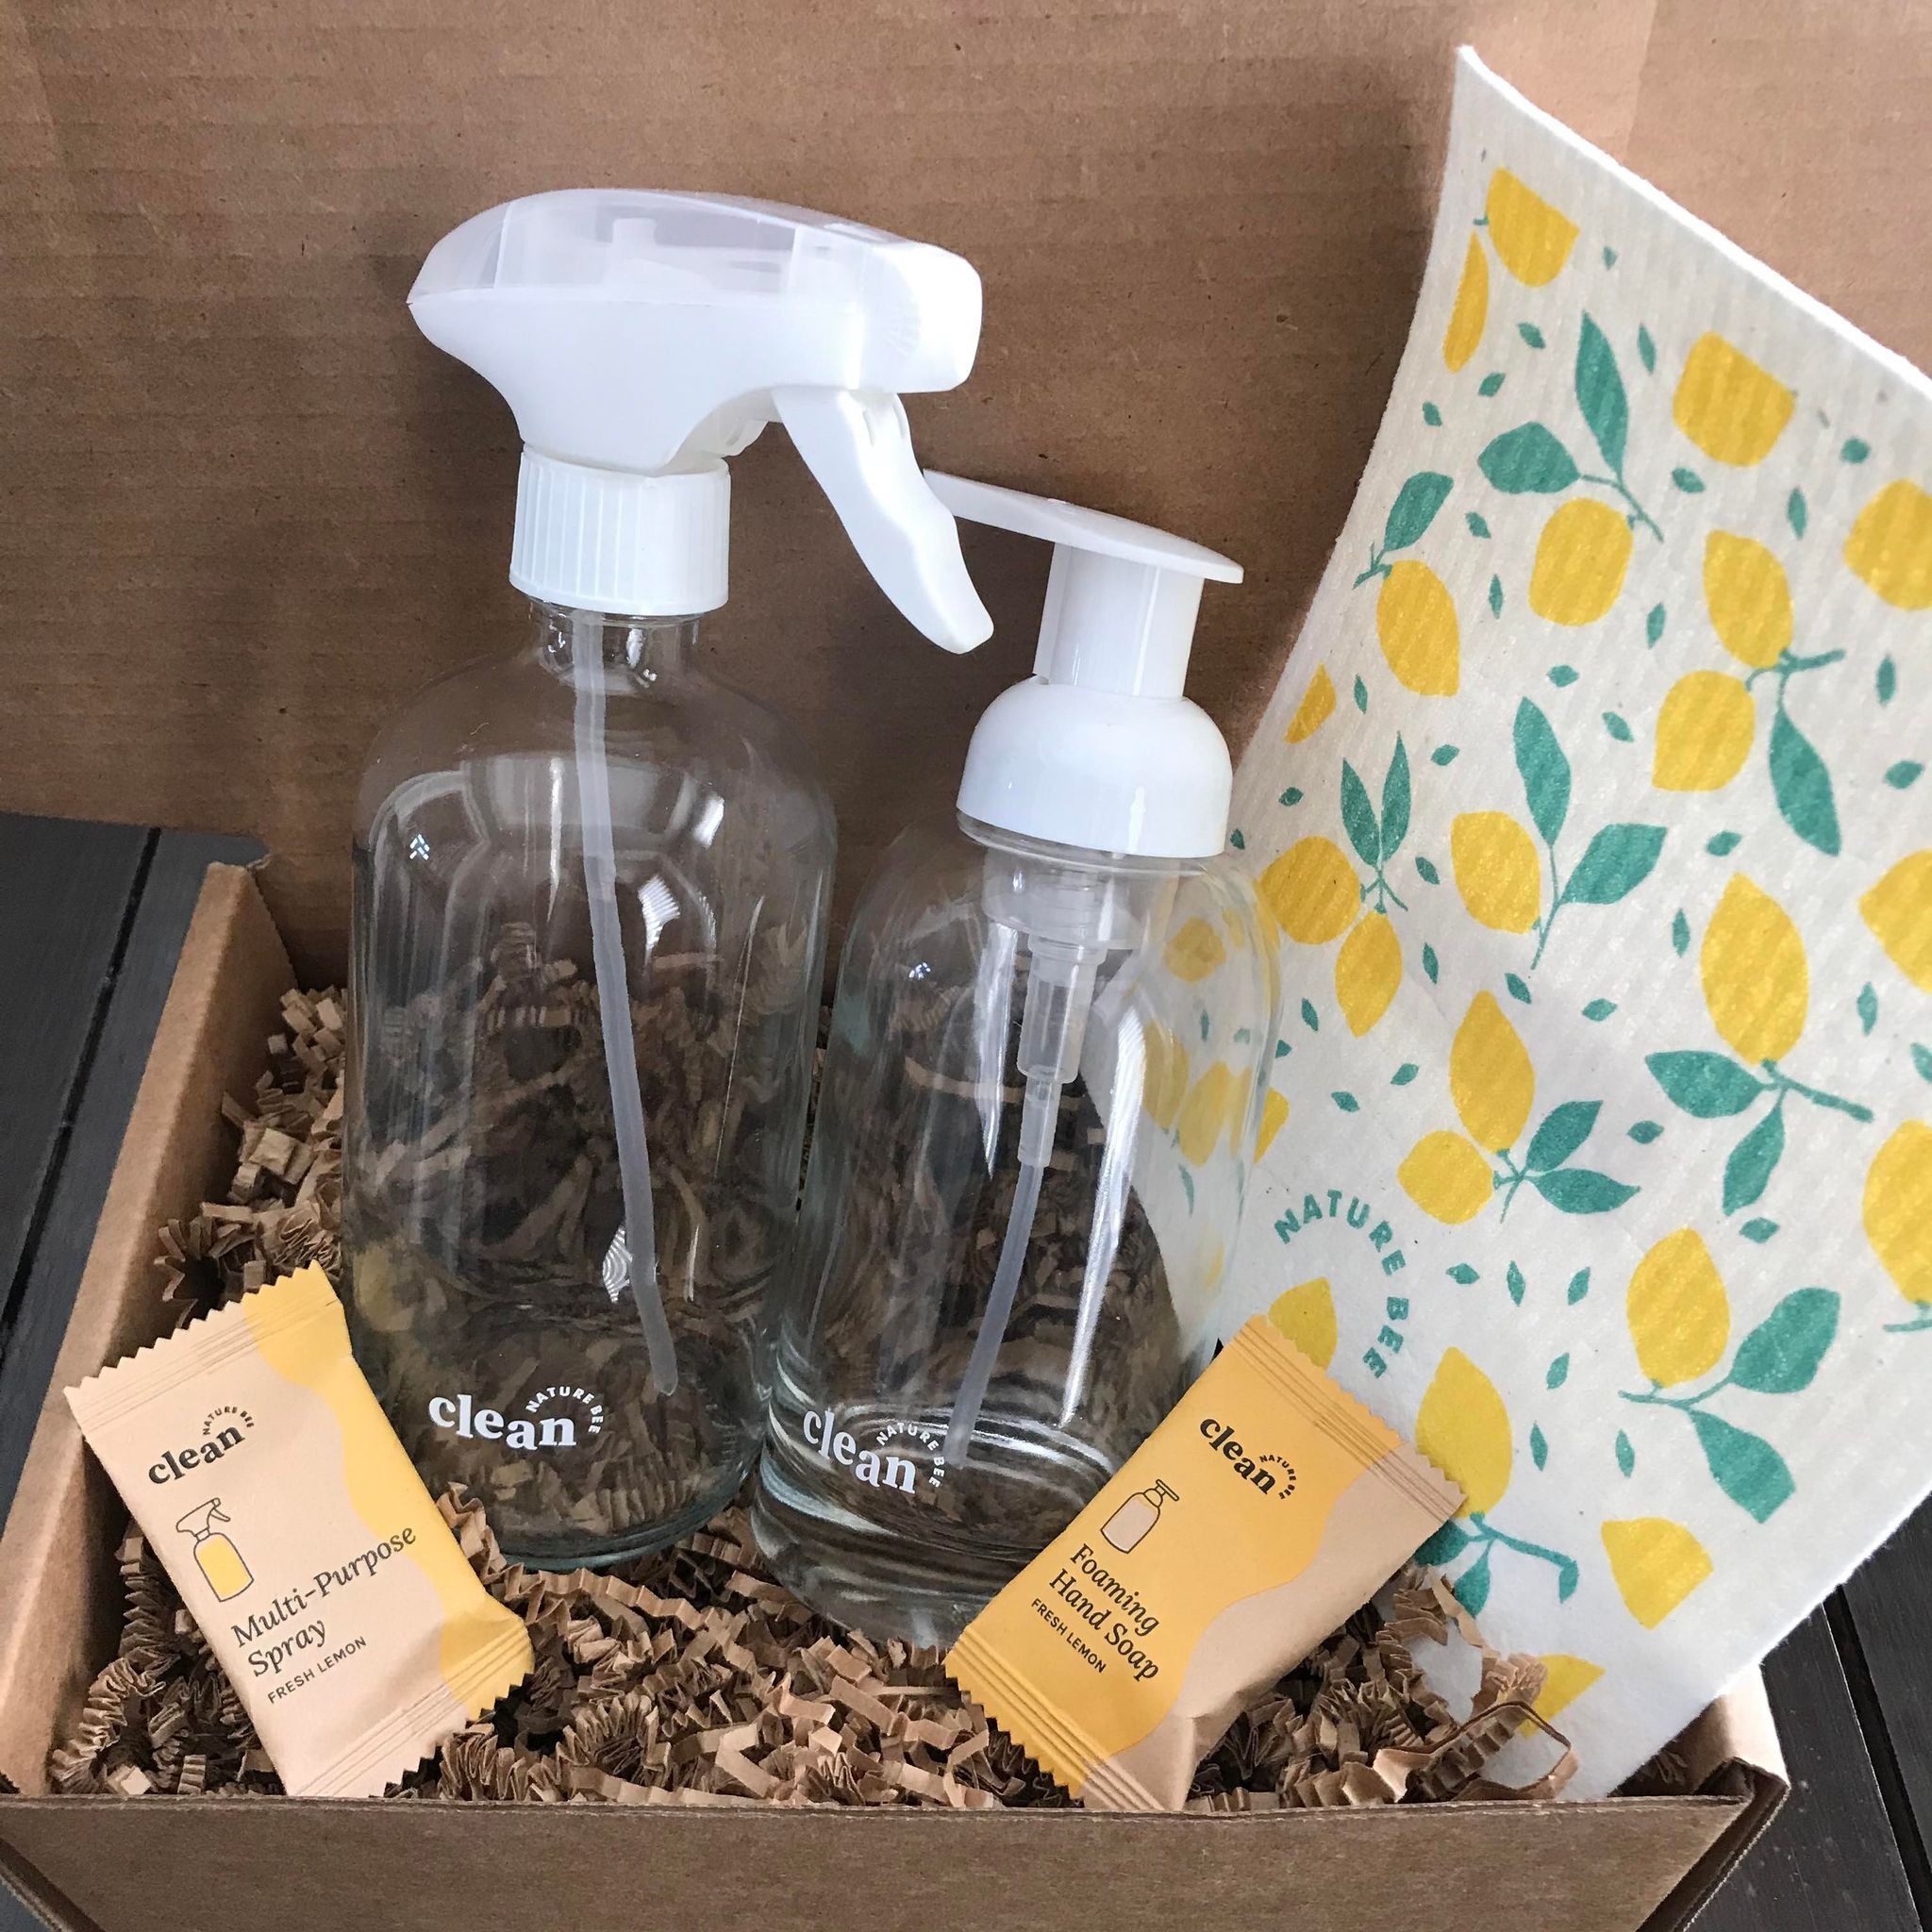 Fresh Lemon refill cleaning starter kit by the Canadian brand Nature Bee Clean comes in a box and includes a Swedish sponge cloth in a lemon pattern, 1 refillable clear glass foamer bottle with white pump top, 1 clear glass spray bottle with white sprayer and 2 tablets - 1 fresh lemon hand soap tablet and 1 fresh lemon multi-purpose spray cleaner tablet 